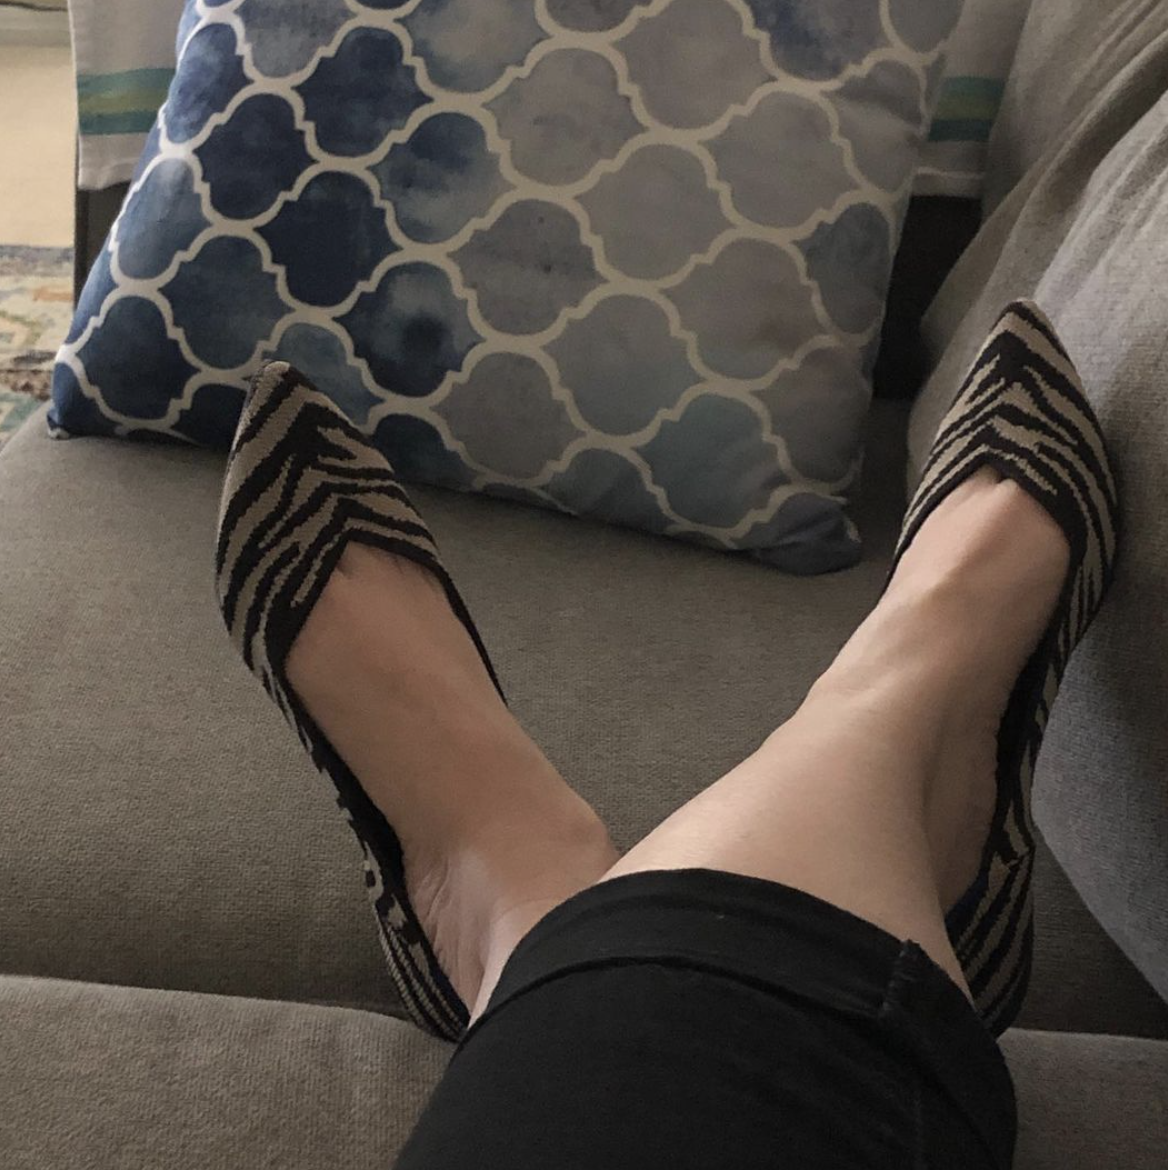 NEW FAVORITE: Rothy’s is the best eco-friendly shoes – honest review